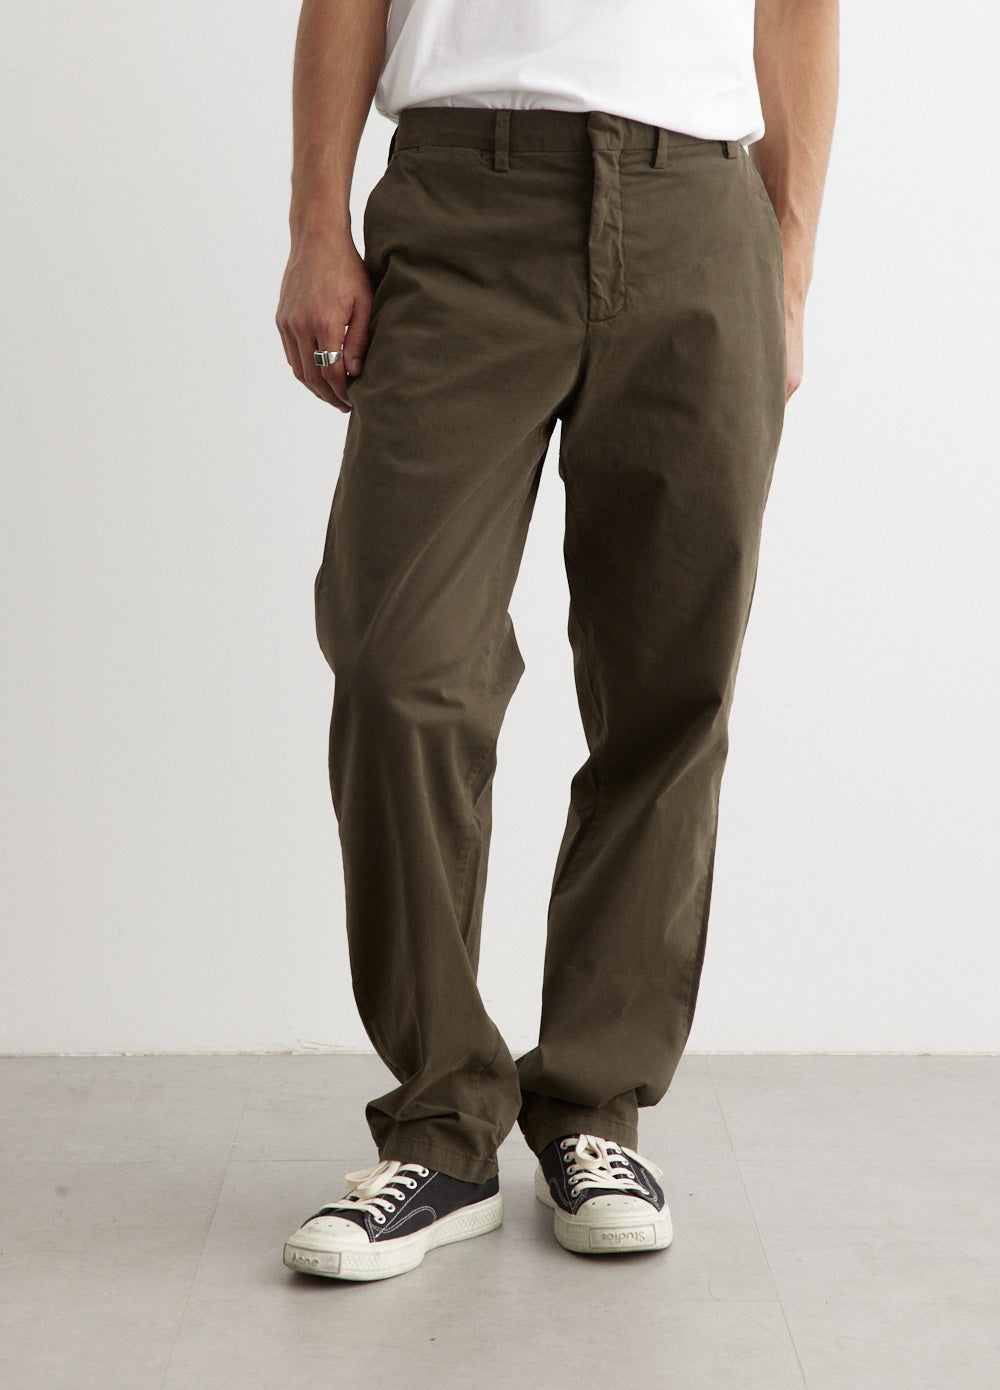 Brushed Cotton Twill Regular Fit Chinos